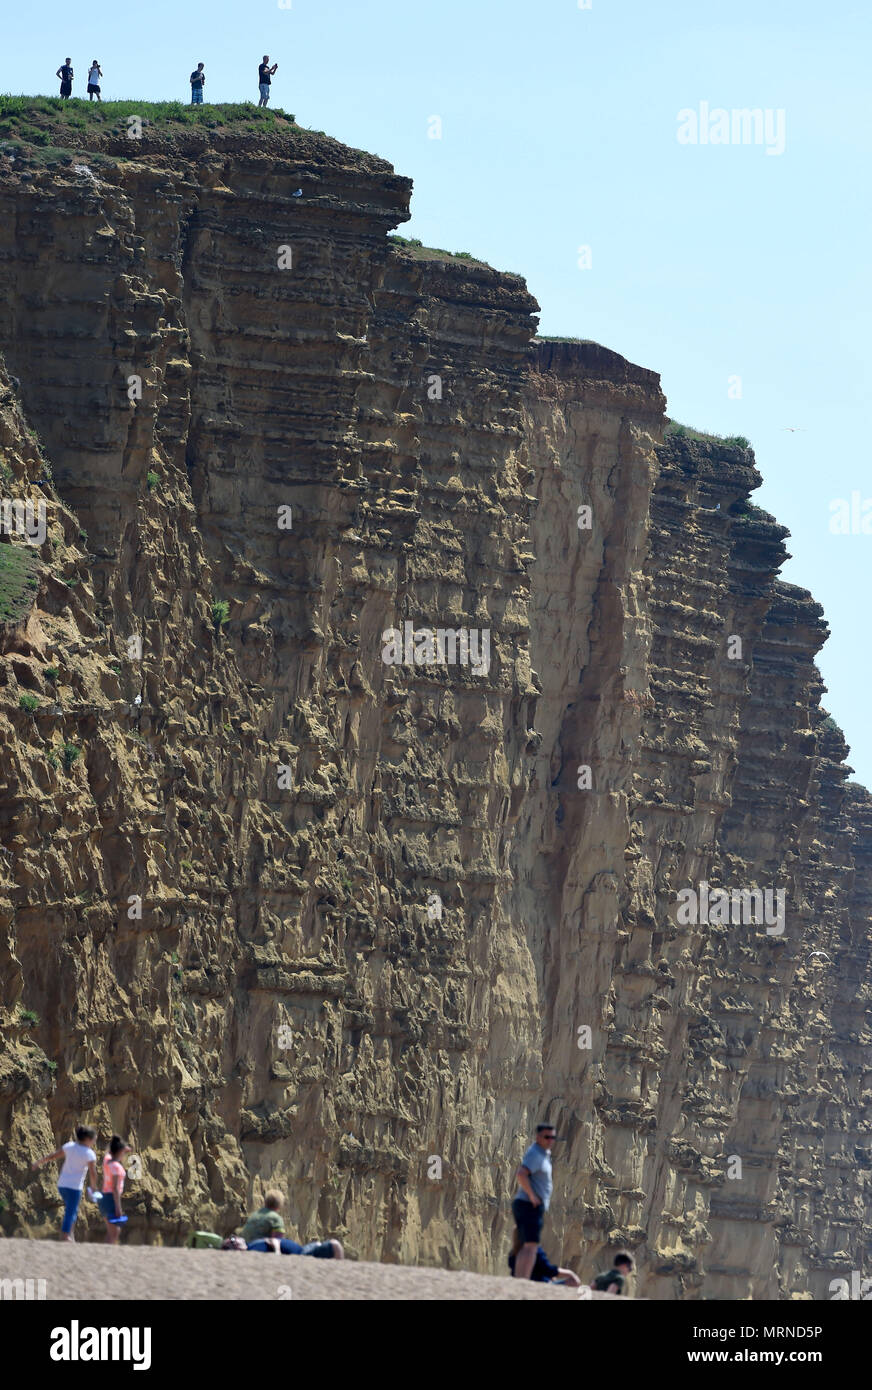 Tourists risk their lives East Cliff at West Bay, Dorset, UK Credit: Finnbarr Webster/Alamy Live News Stock Photo